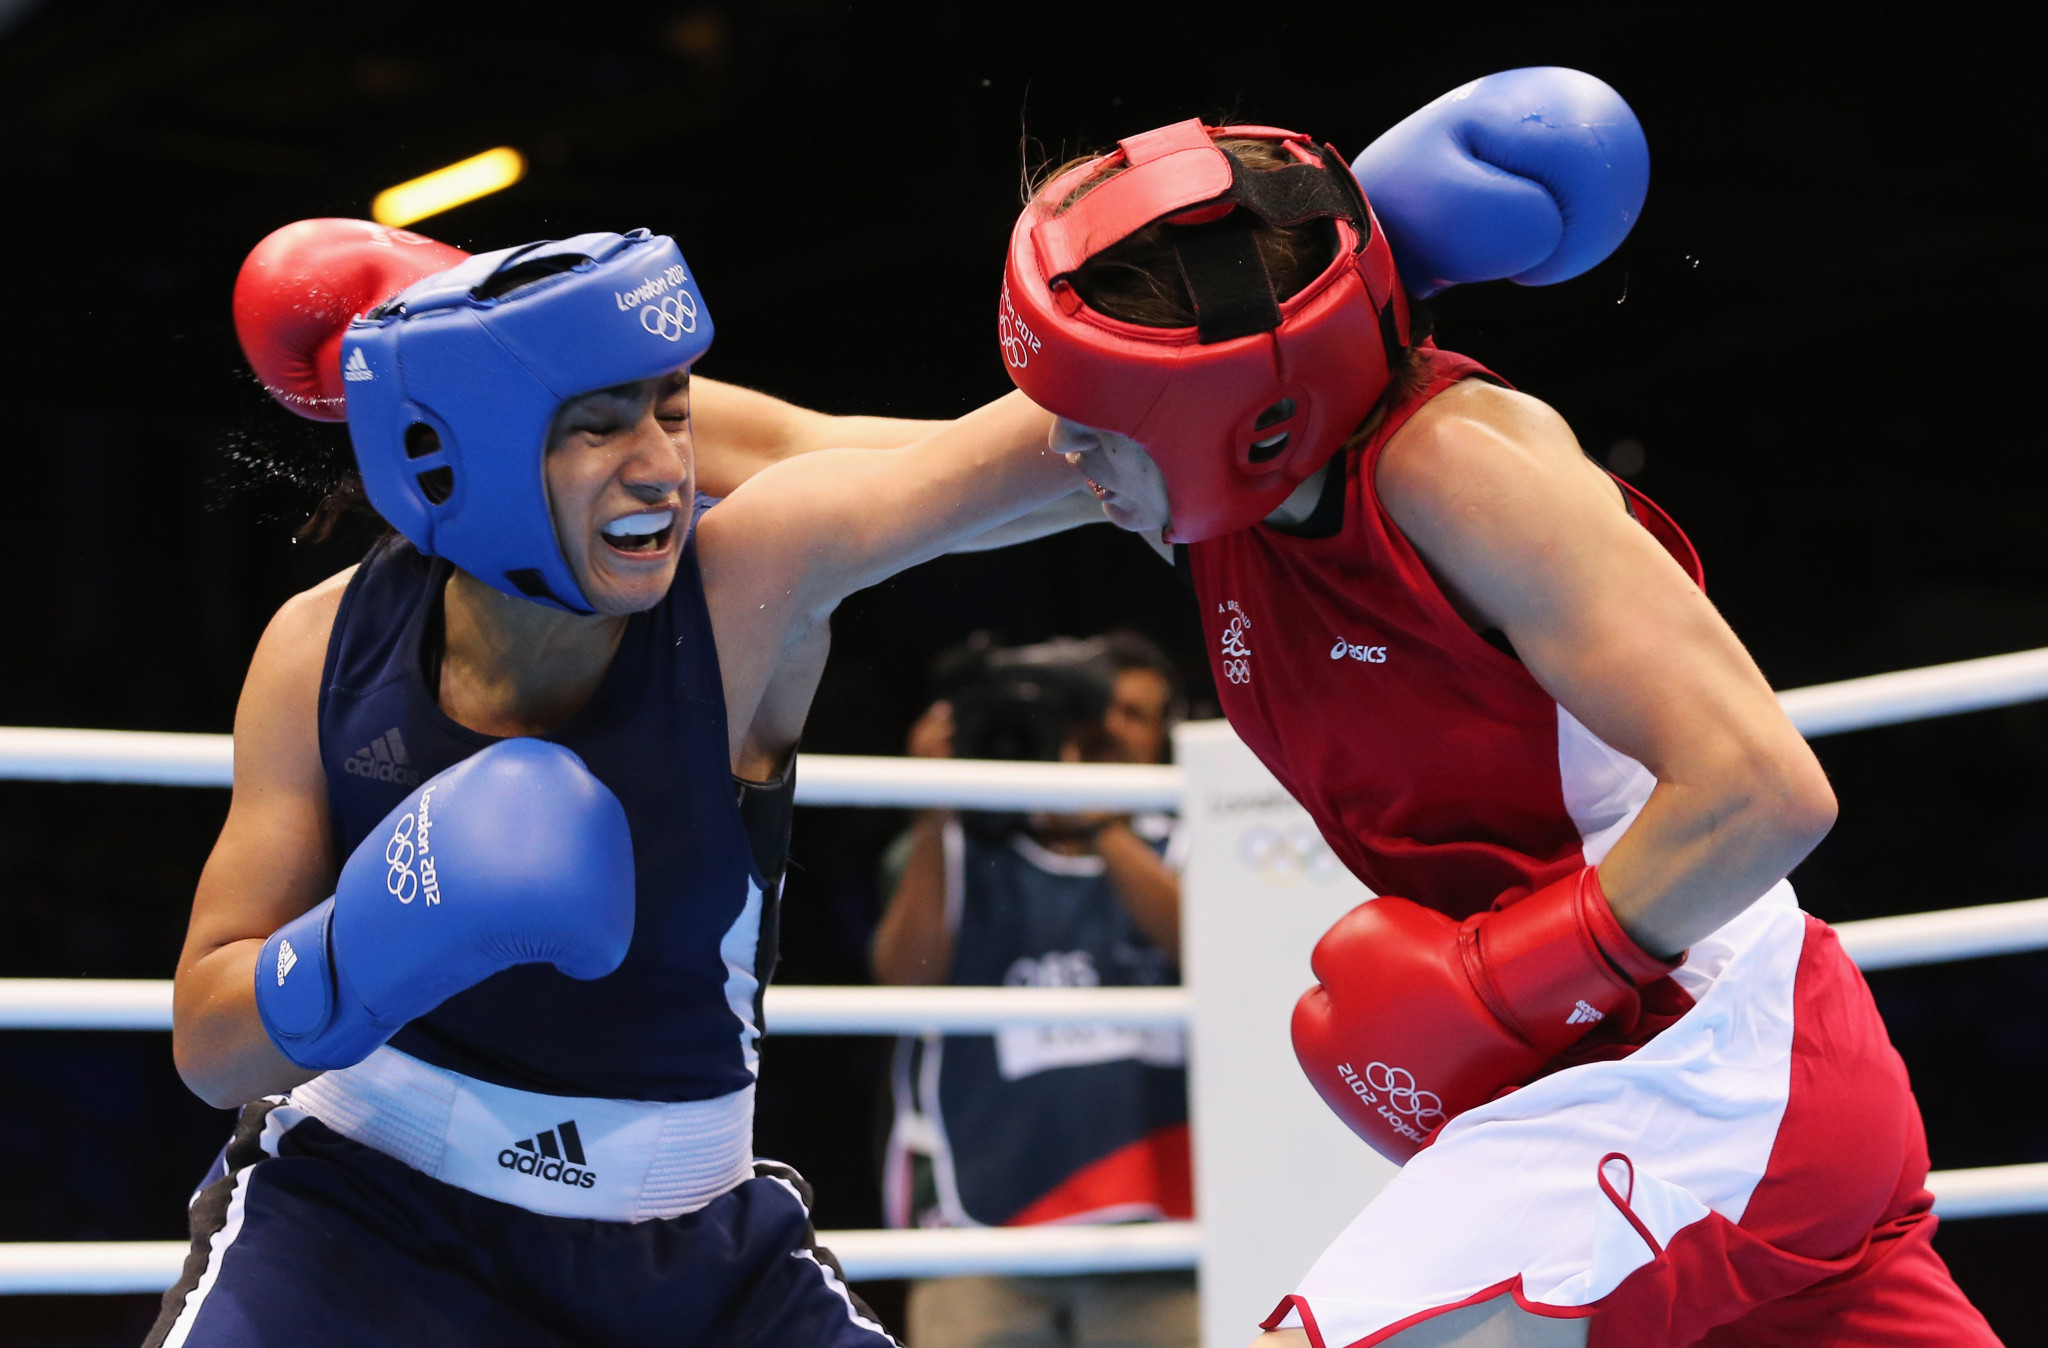 Mavzuna Chorieva, left, is the only boxer to have represented Tajikistan at the Olympic Games, winning a bronze in the women's lightweight division at London 2012 ©Getty Images